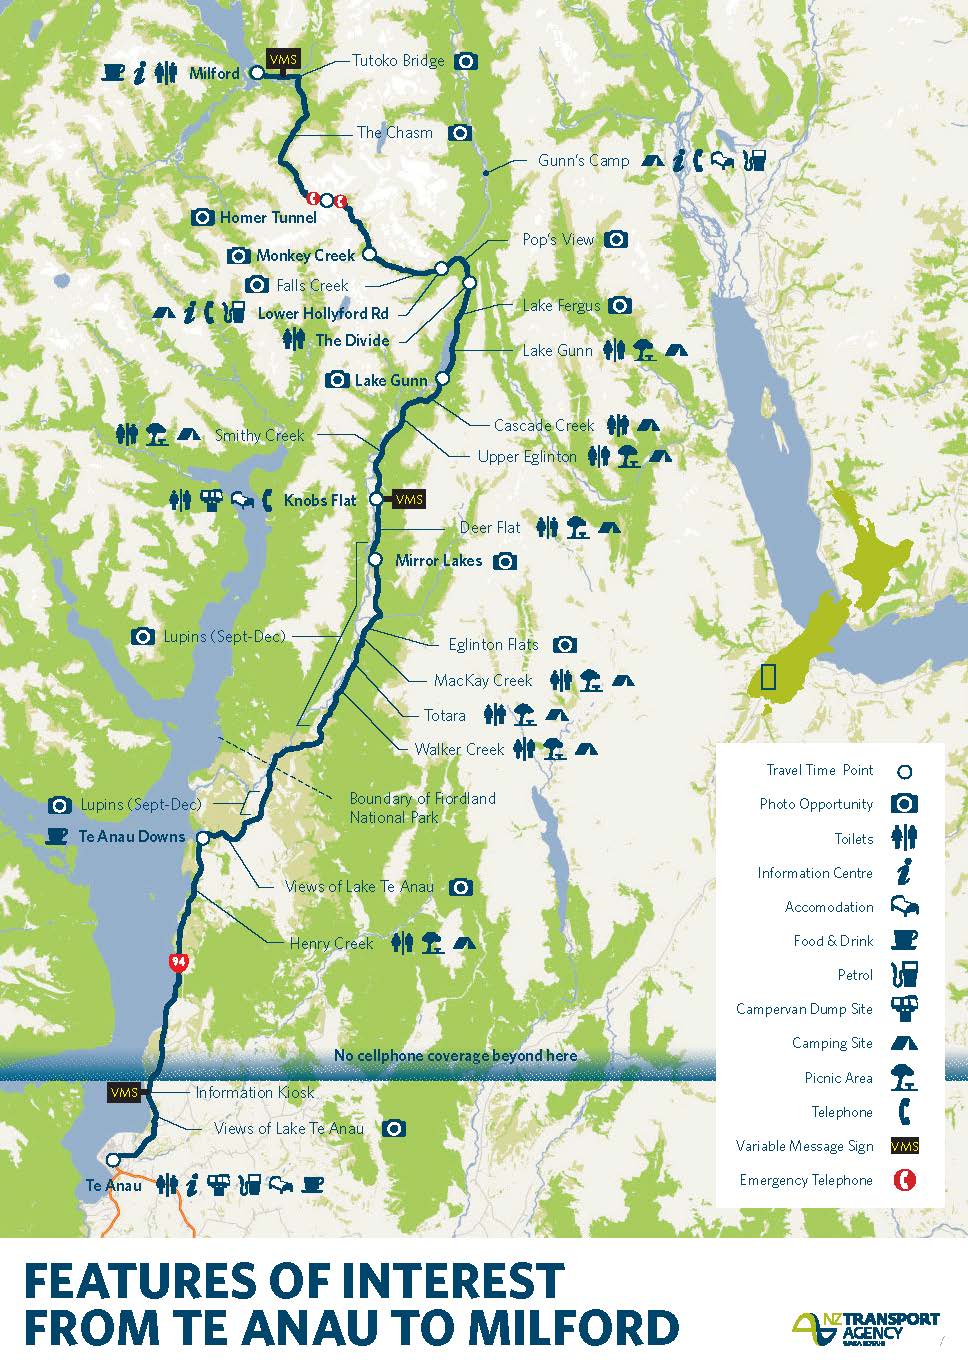 Map showing features of interest from Te Anau to Milford for tourists